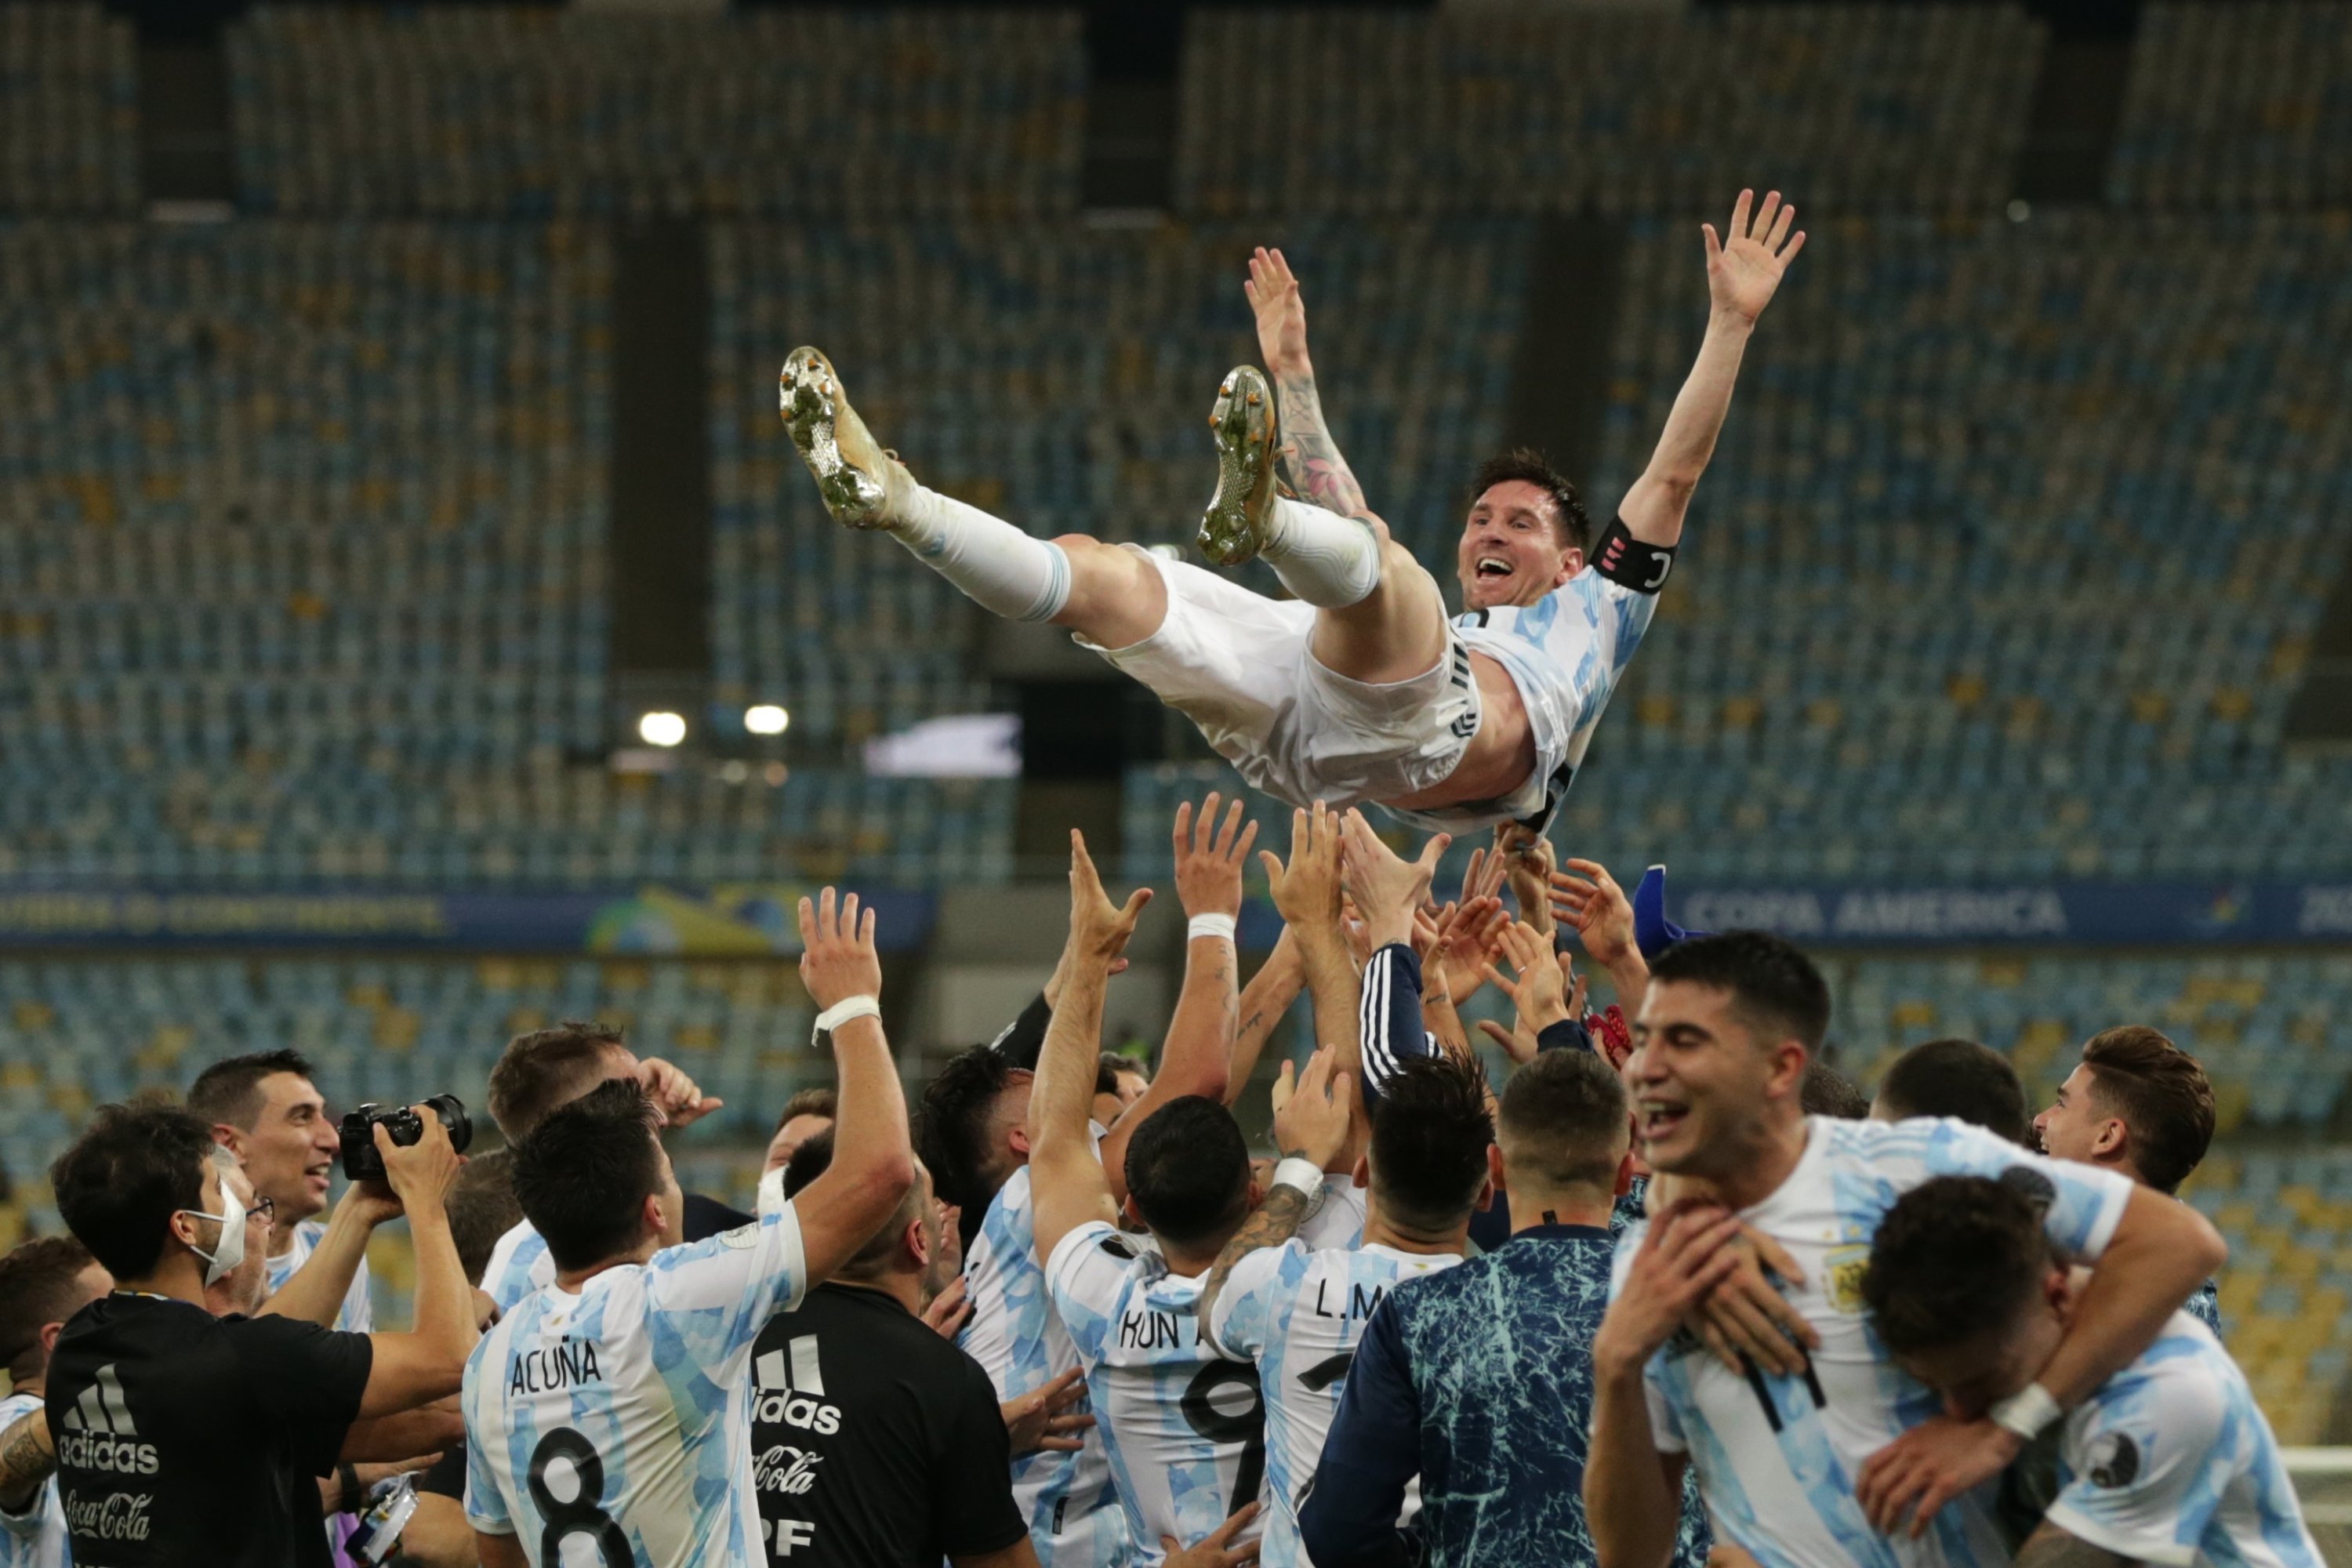 Argentina players toss Lionel Messi in the air as they celebrate their victory against Brazil in the Copa America final match at Maracana Stadium in Rio de Janeiro, Brazil, July 10, 2021. (EPA Photo)